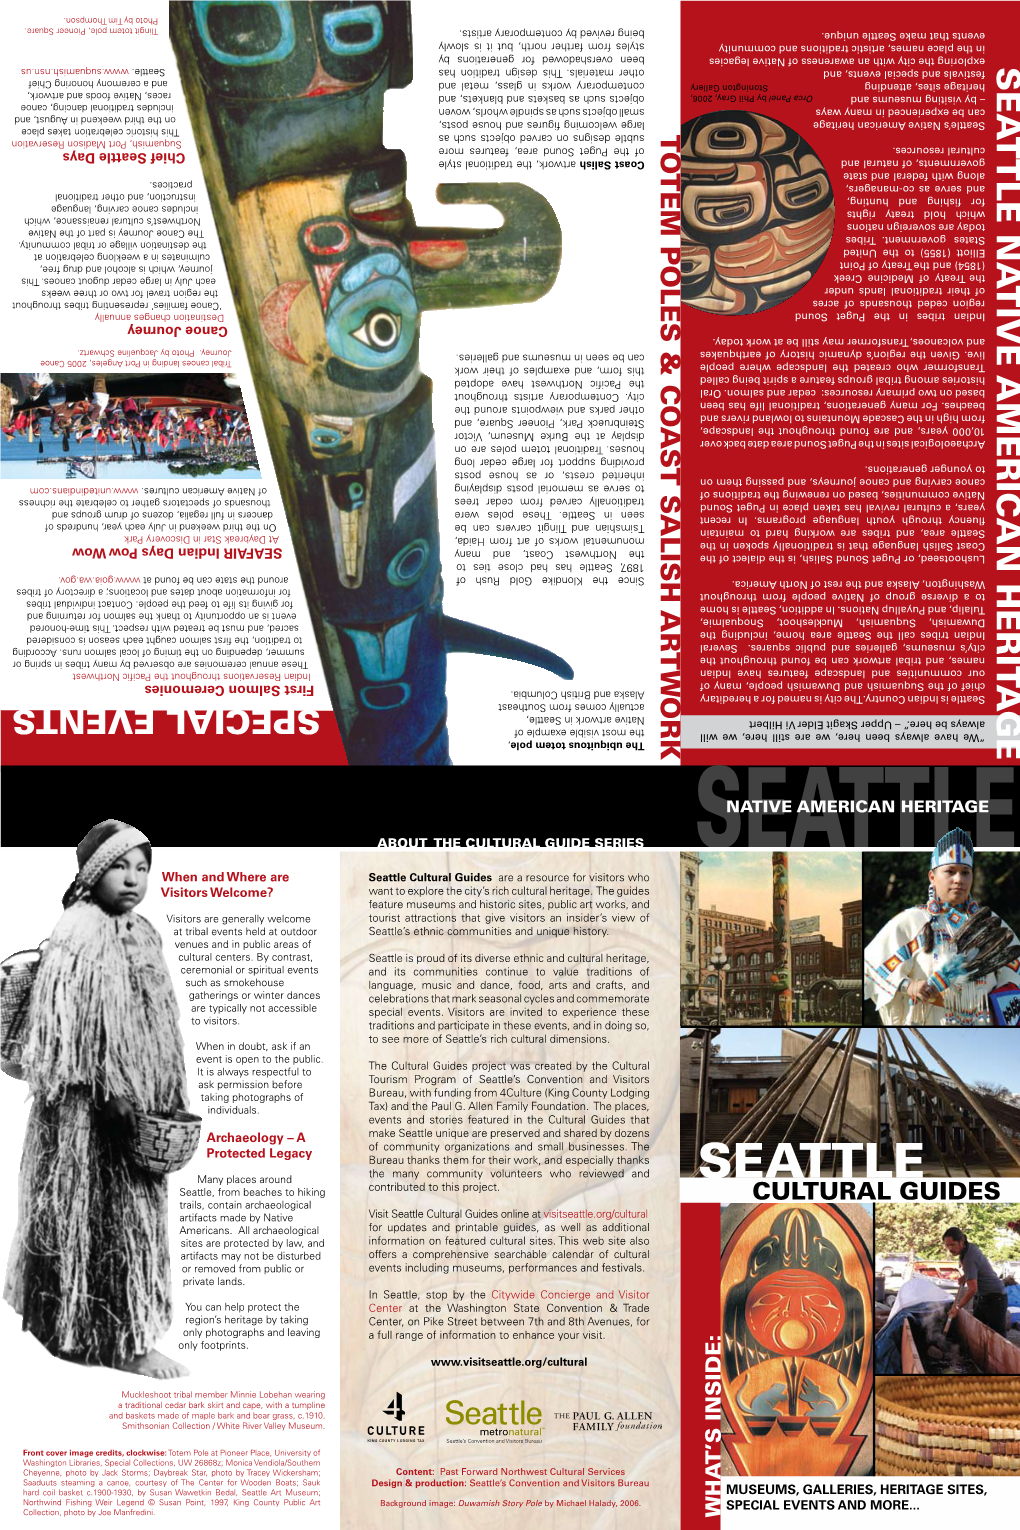 SEATTLE NATIVE AMERICAN HERITAGE Events That Make Seattleevents That Make Unique